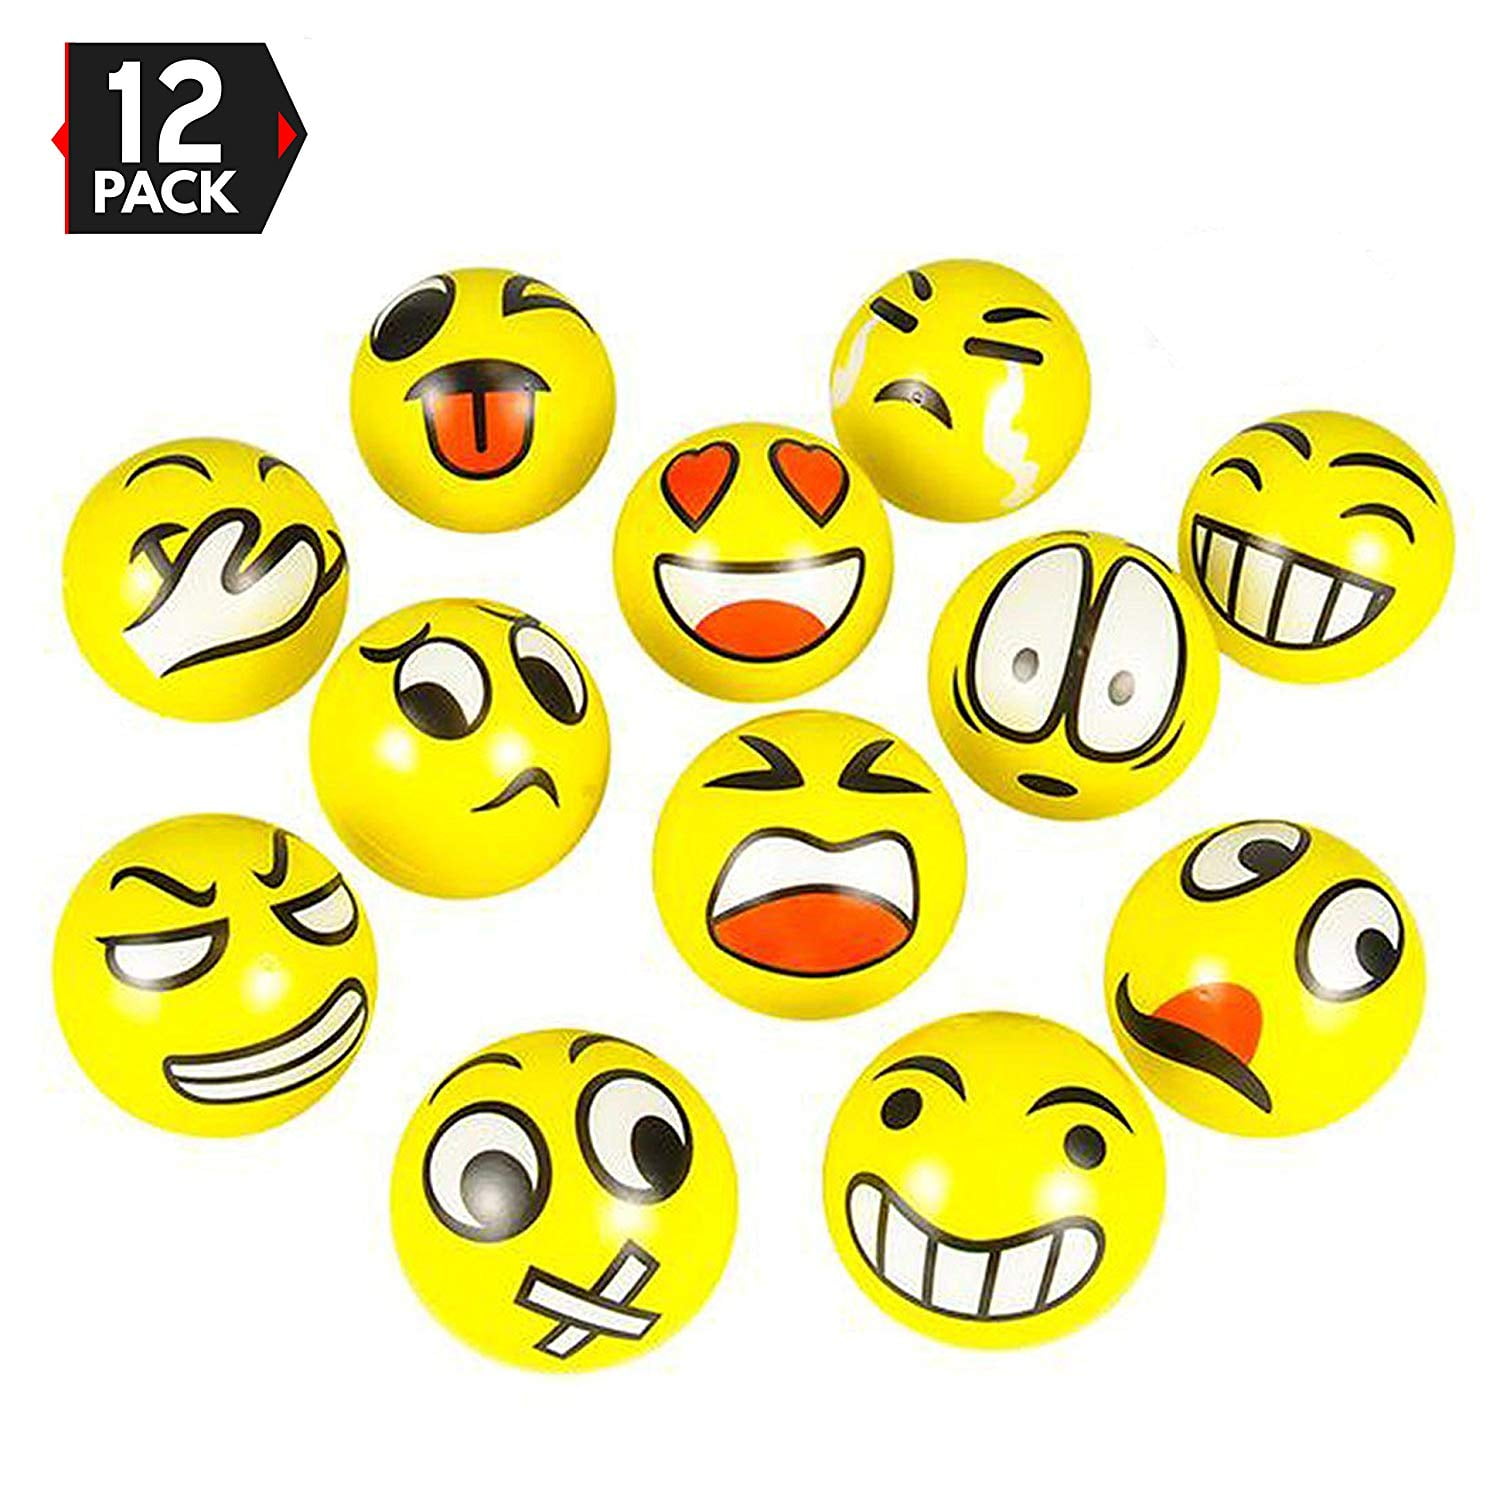 Details about   Emoji Fun Toy Sling Shot Includes Sling Shot and 2 Silly Face Shooters Set of 3 